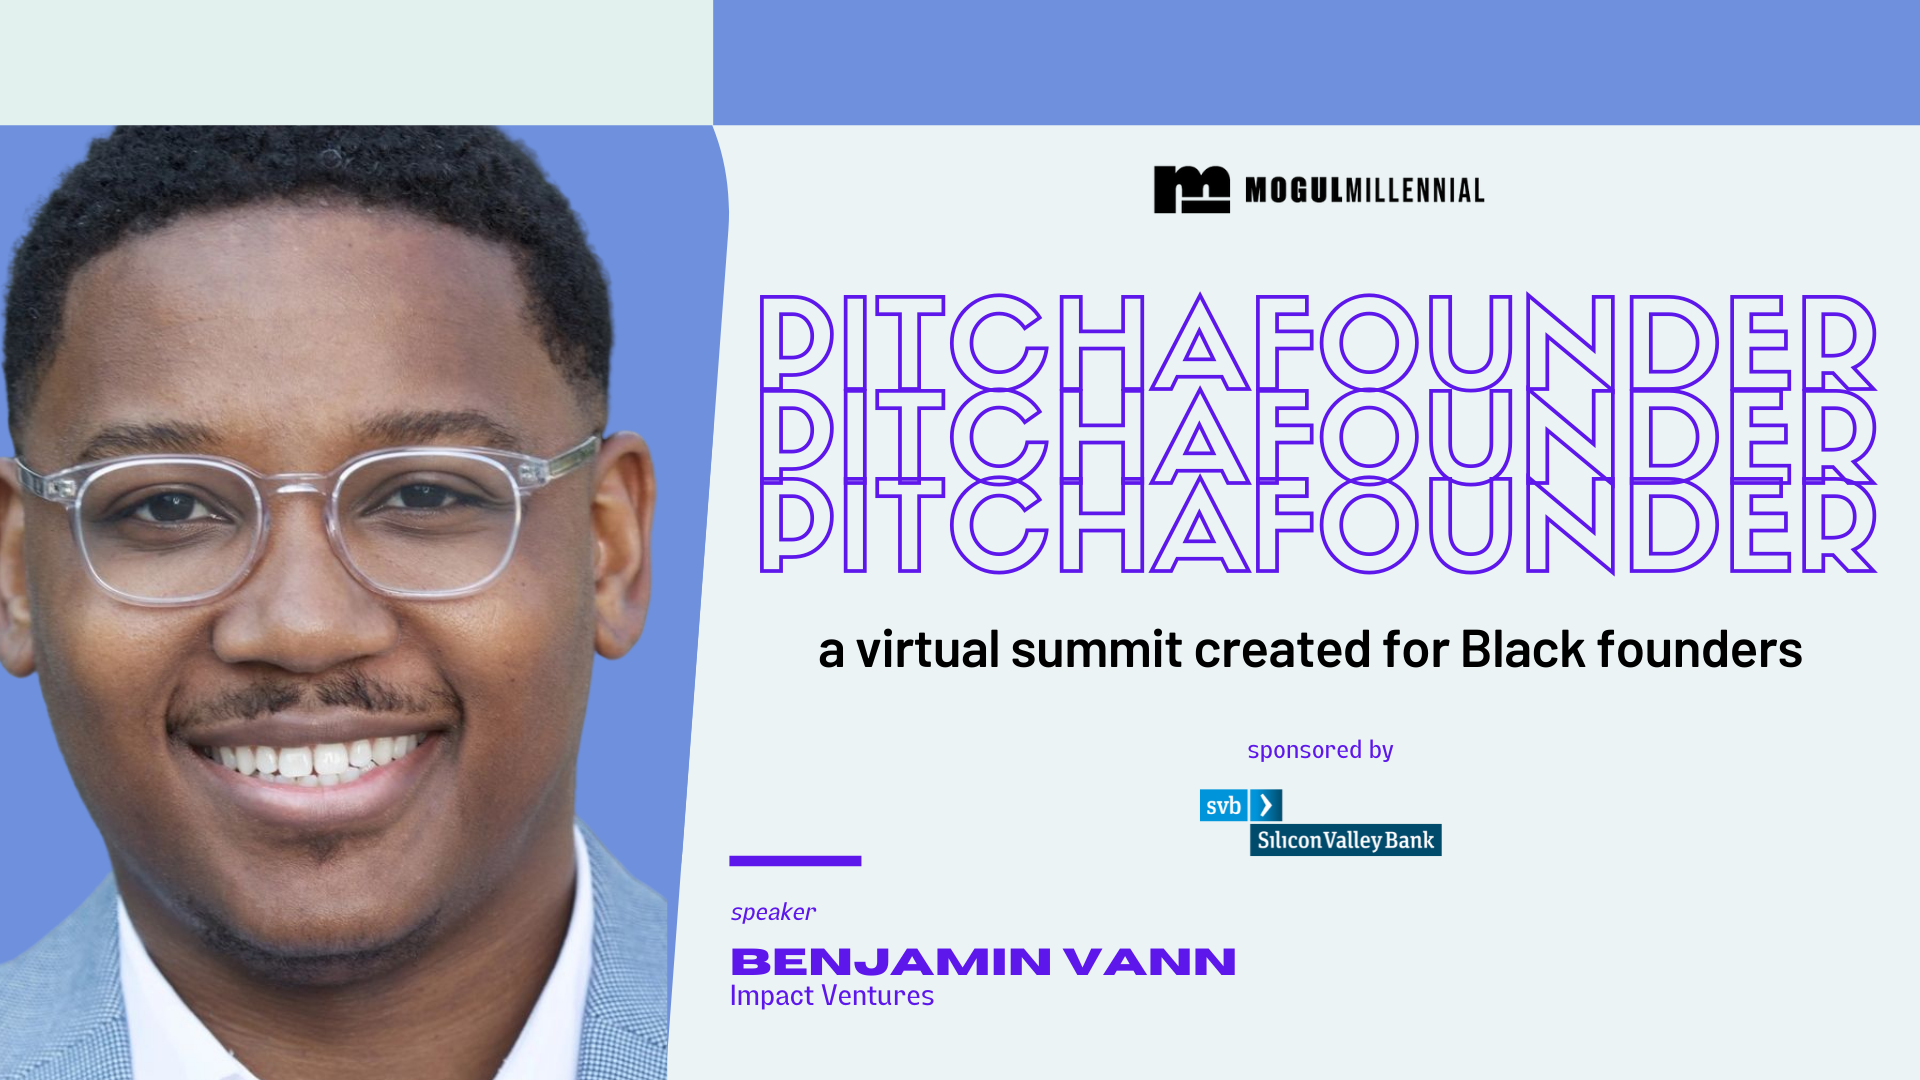 Benjamin Vann of Impact Ventures at Pitch a Founder